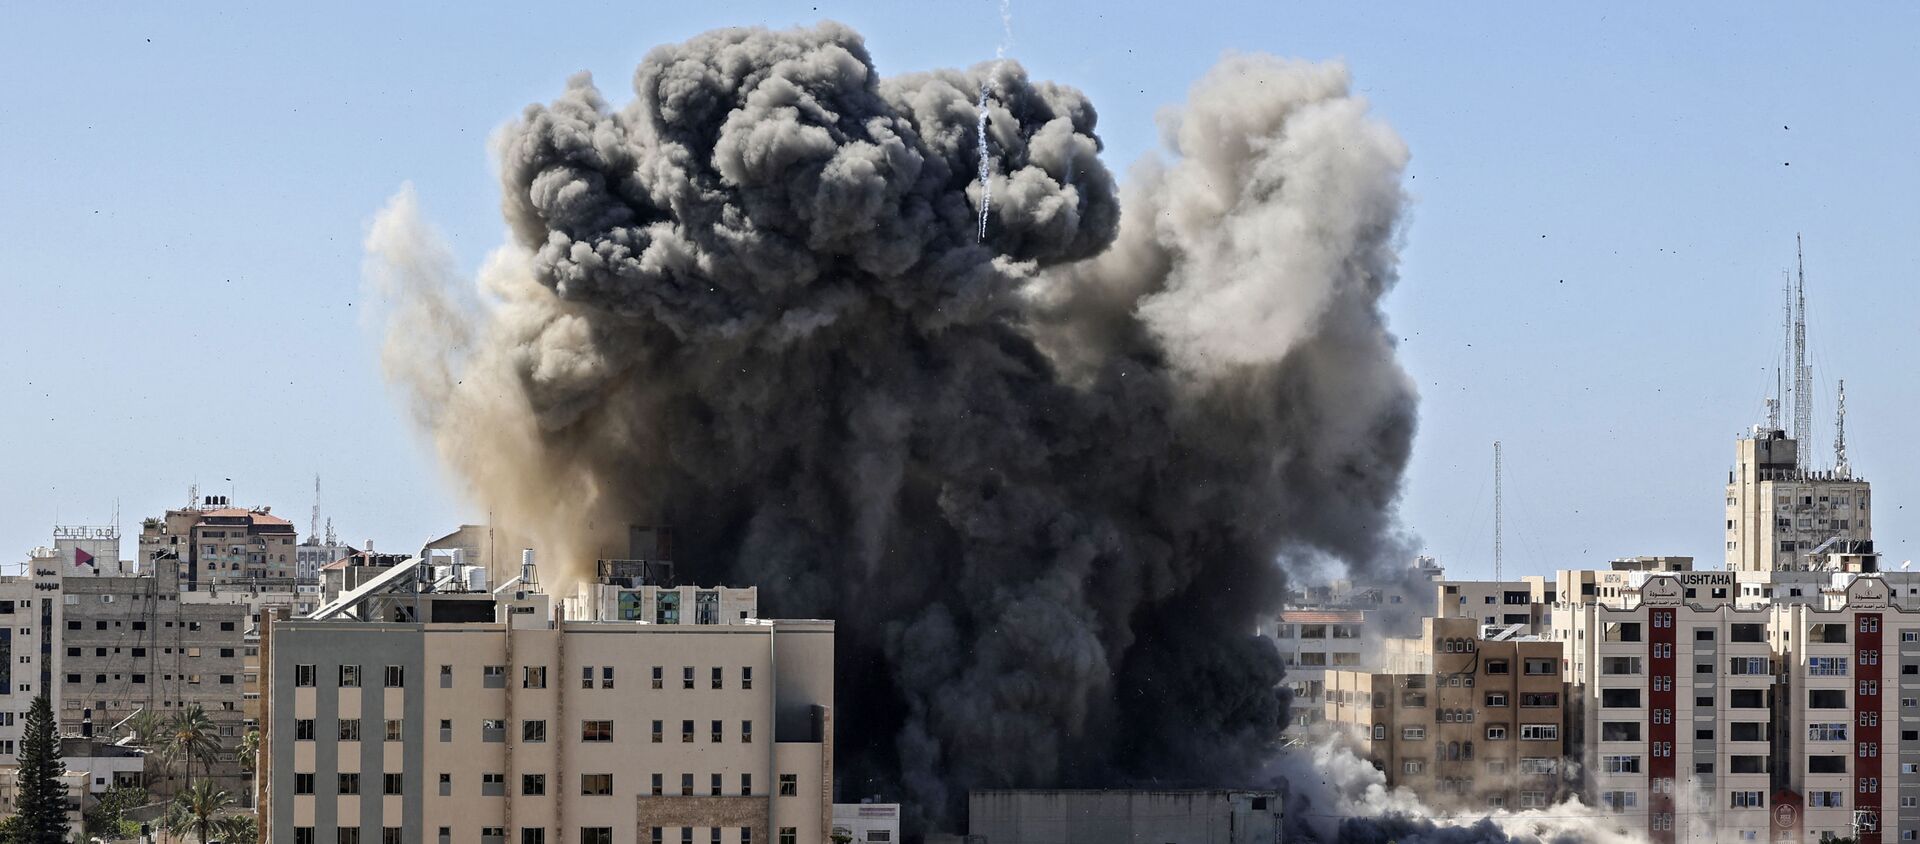 A thick column of smoke rises from the Jala Tower as it is destroyed in an Israeli airstrike in Gaza city controlled by the Palestinian Hamas movement, on May 15, 2021. - Sputnik International, 1920, 17.05.2021